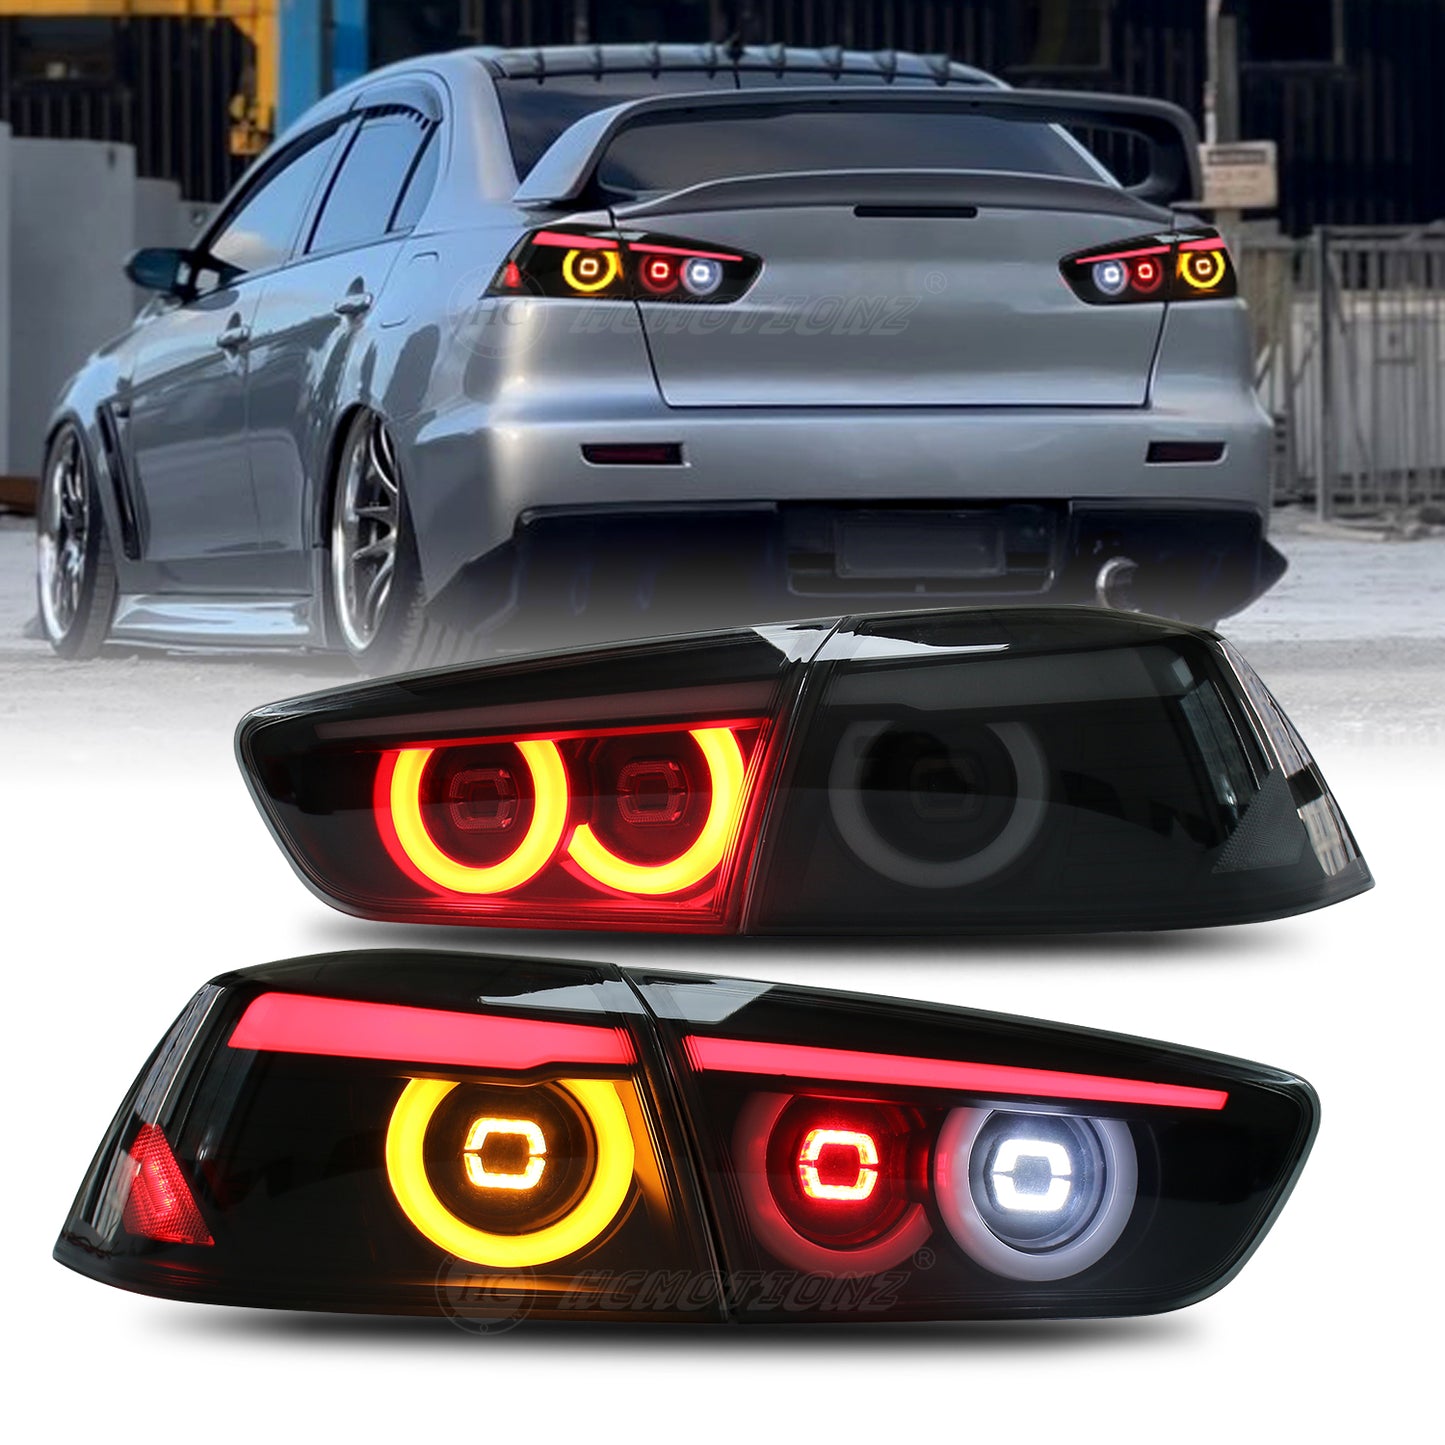 HCMOTION For Mitsubishi Lancer 2008-2017 EVO X Smoked LED Continuous Taillight Animation 4Pcs Rear Lamp